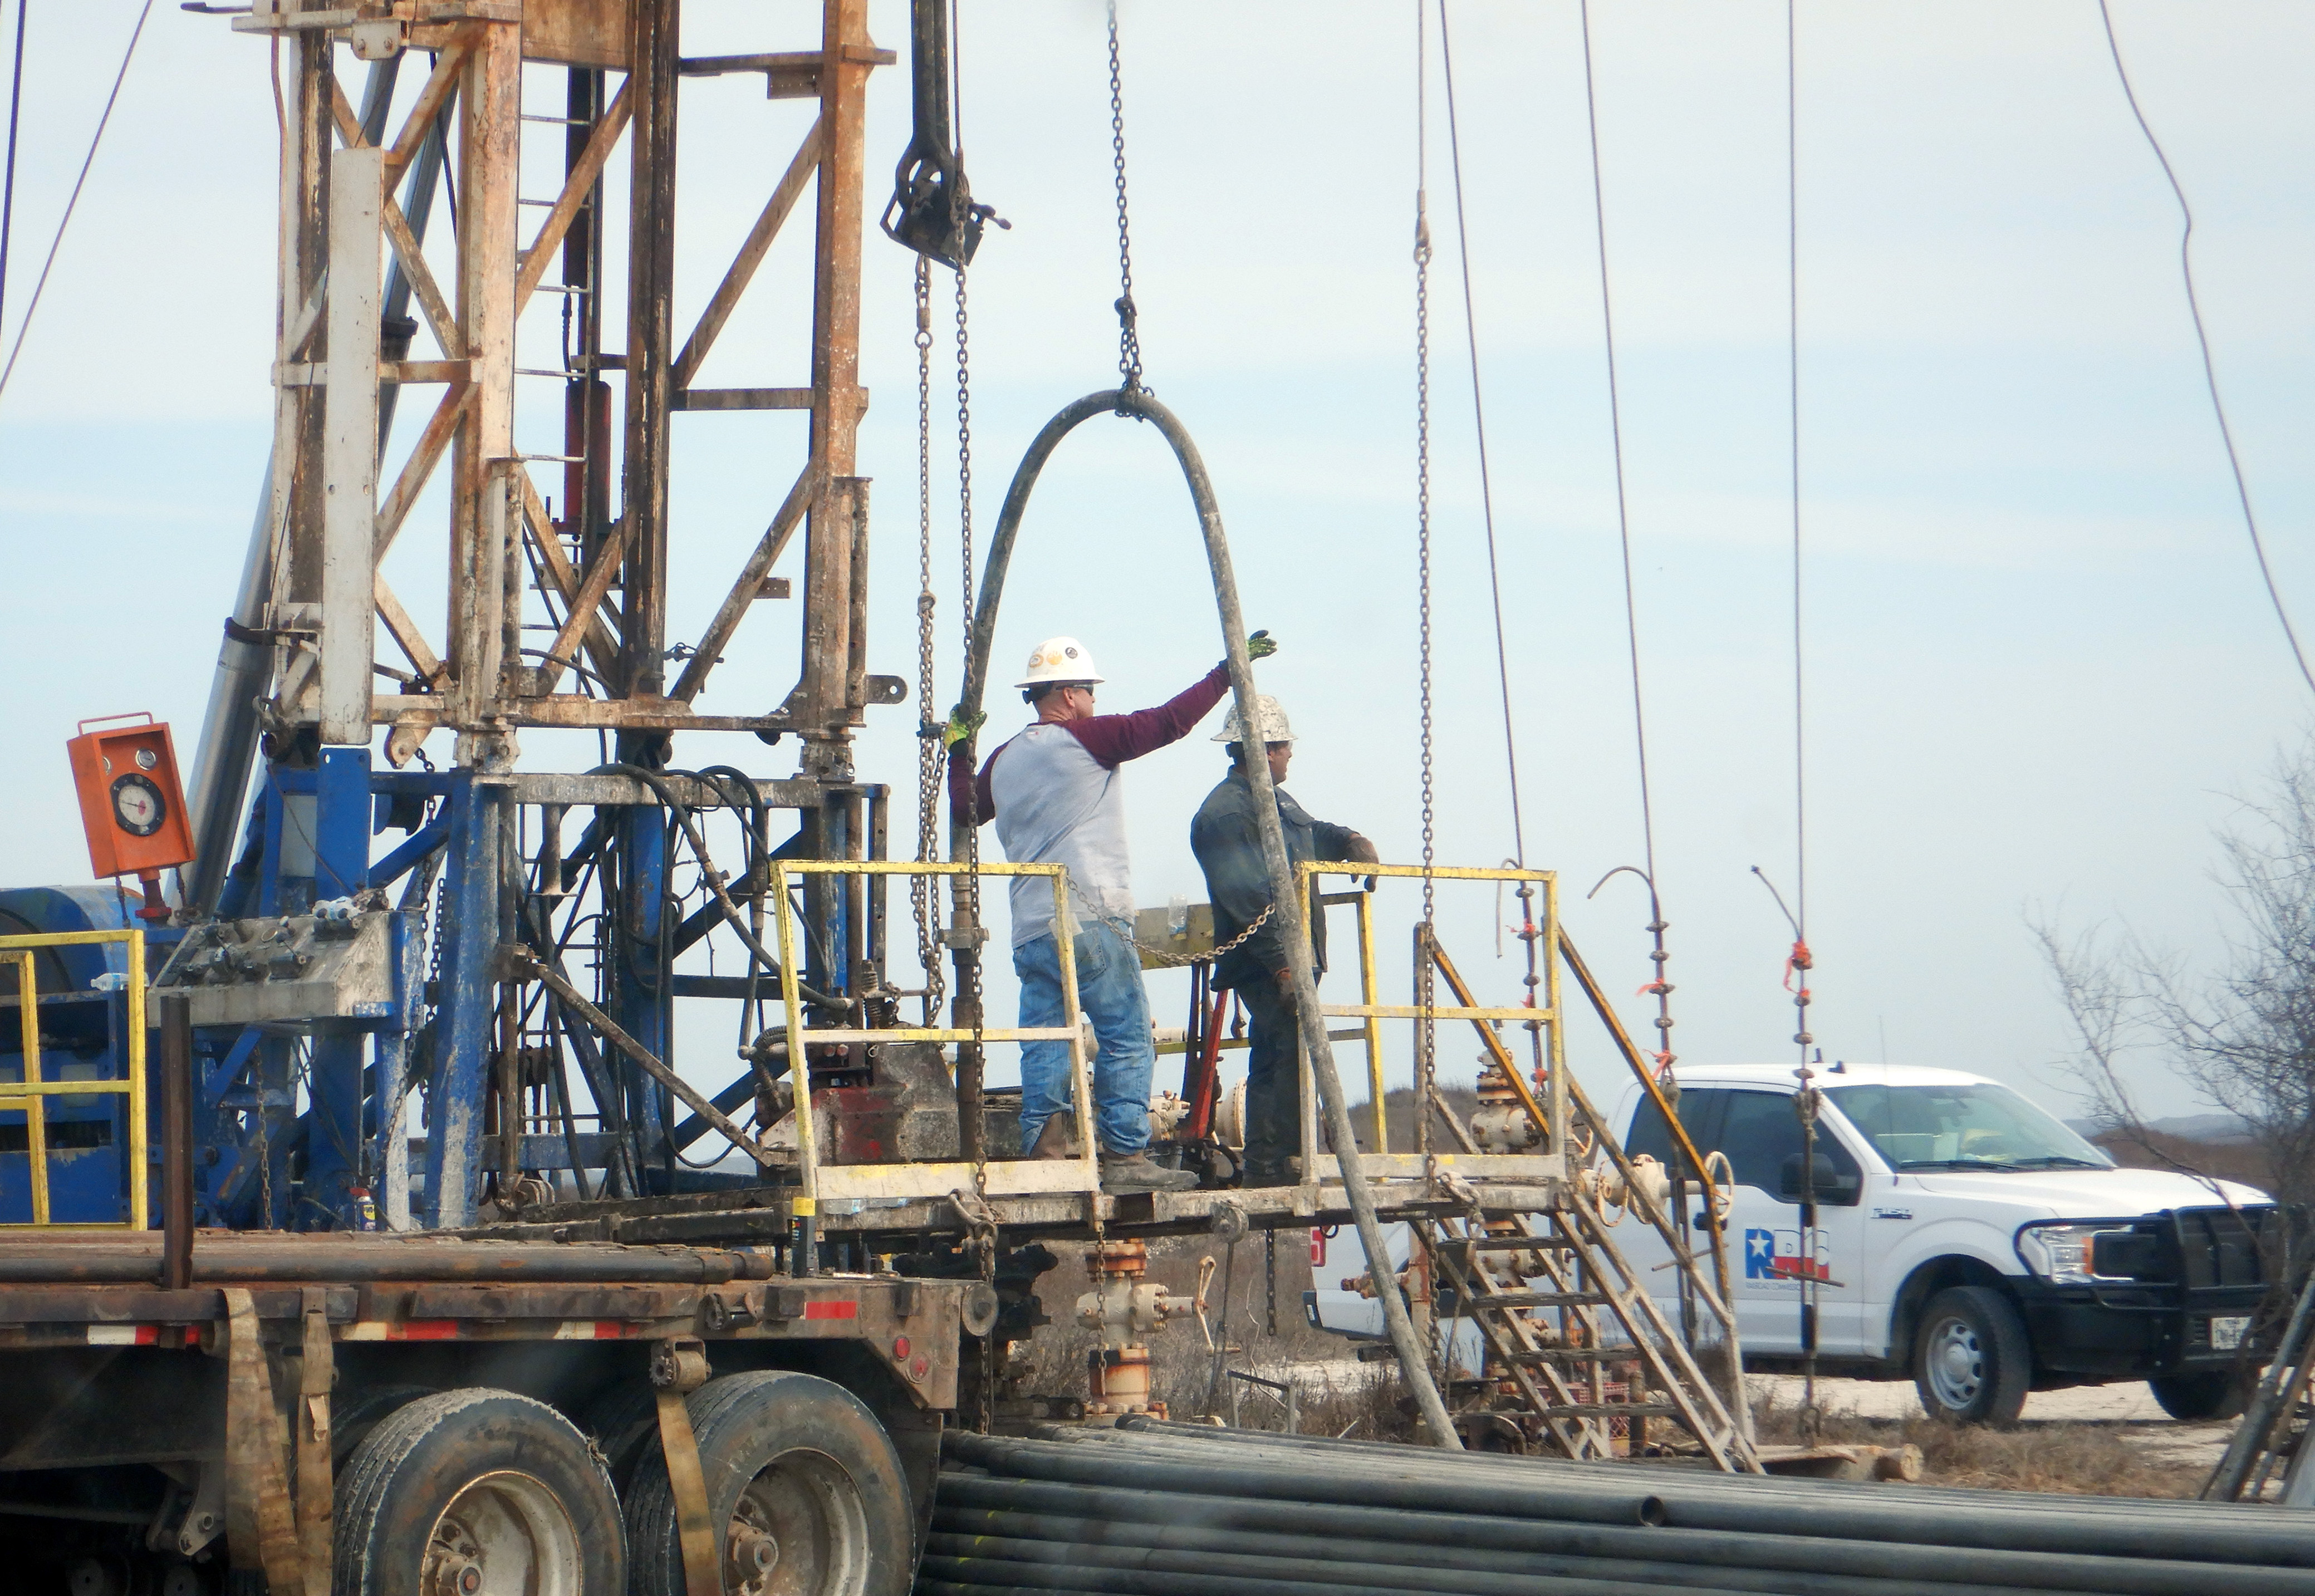 RRC helping plug a well in Padre Island National Seashore